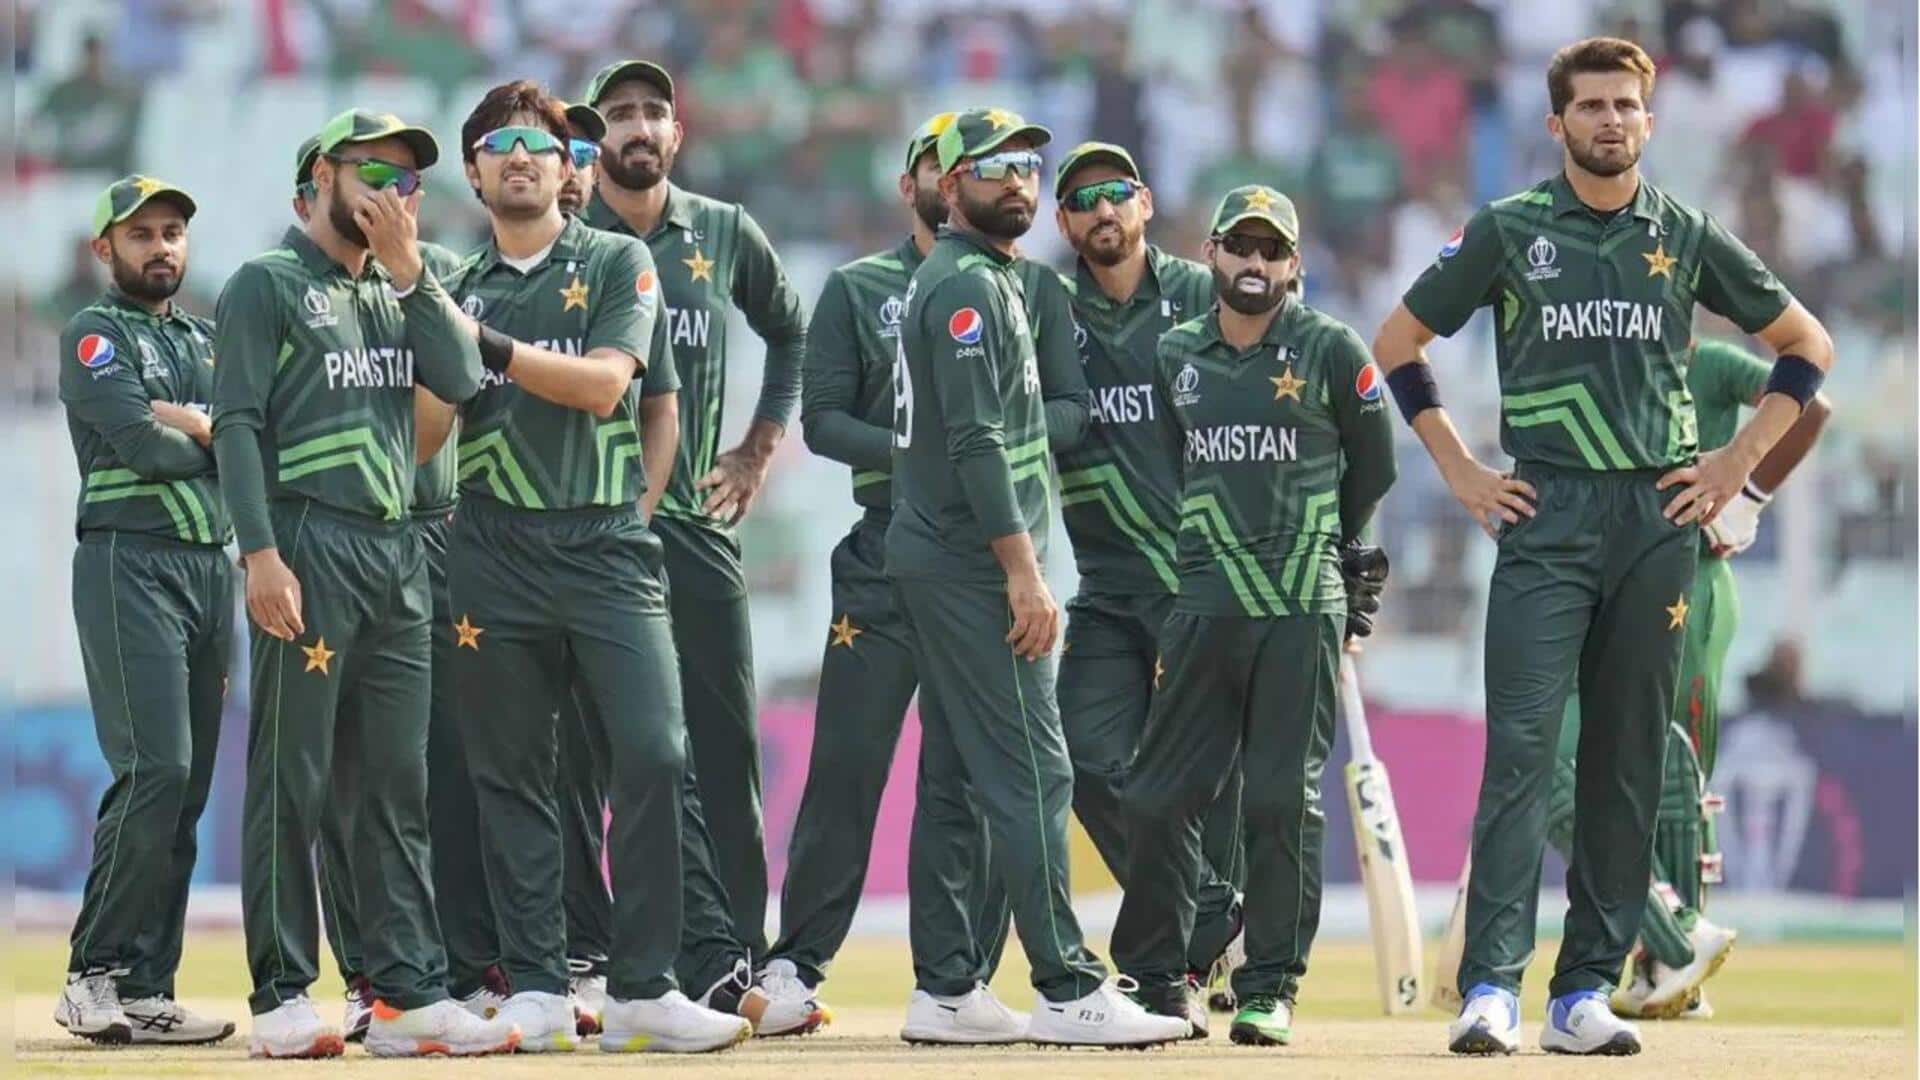 Low strike rates, expensive spells: Pakistan's World Cup 2023 campaign